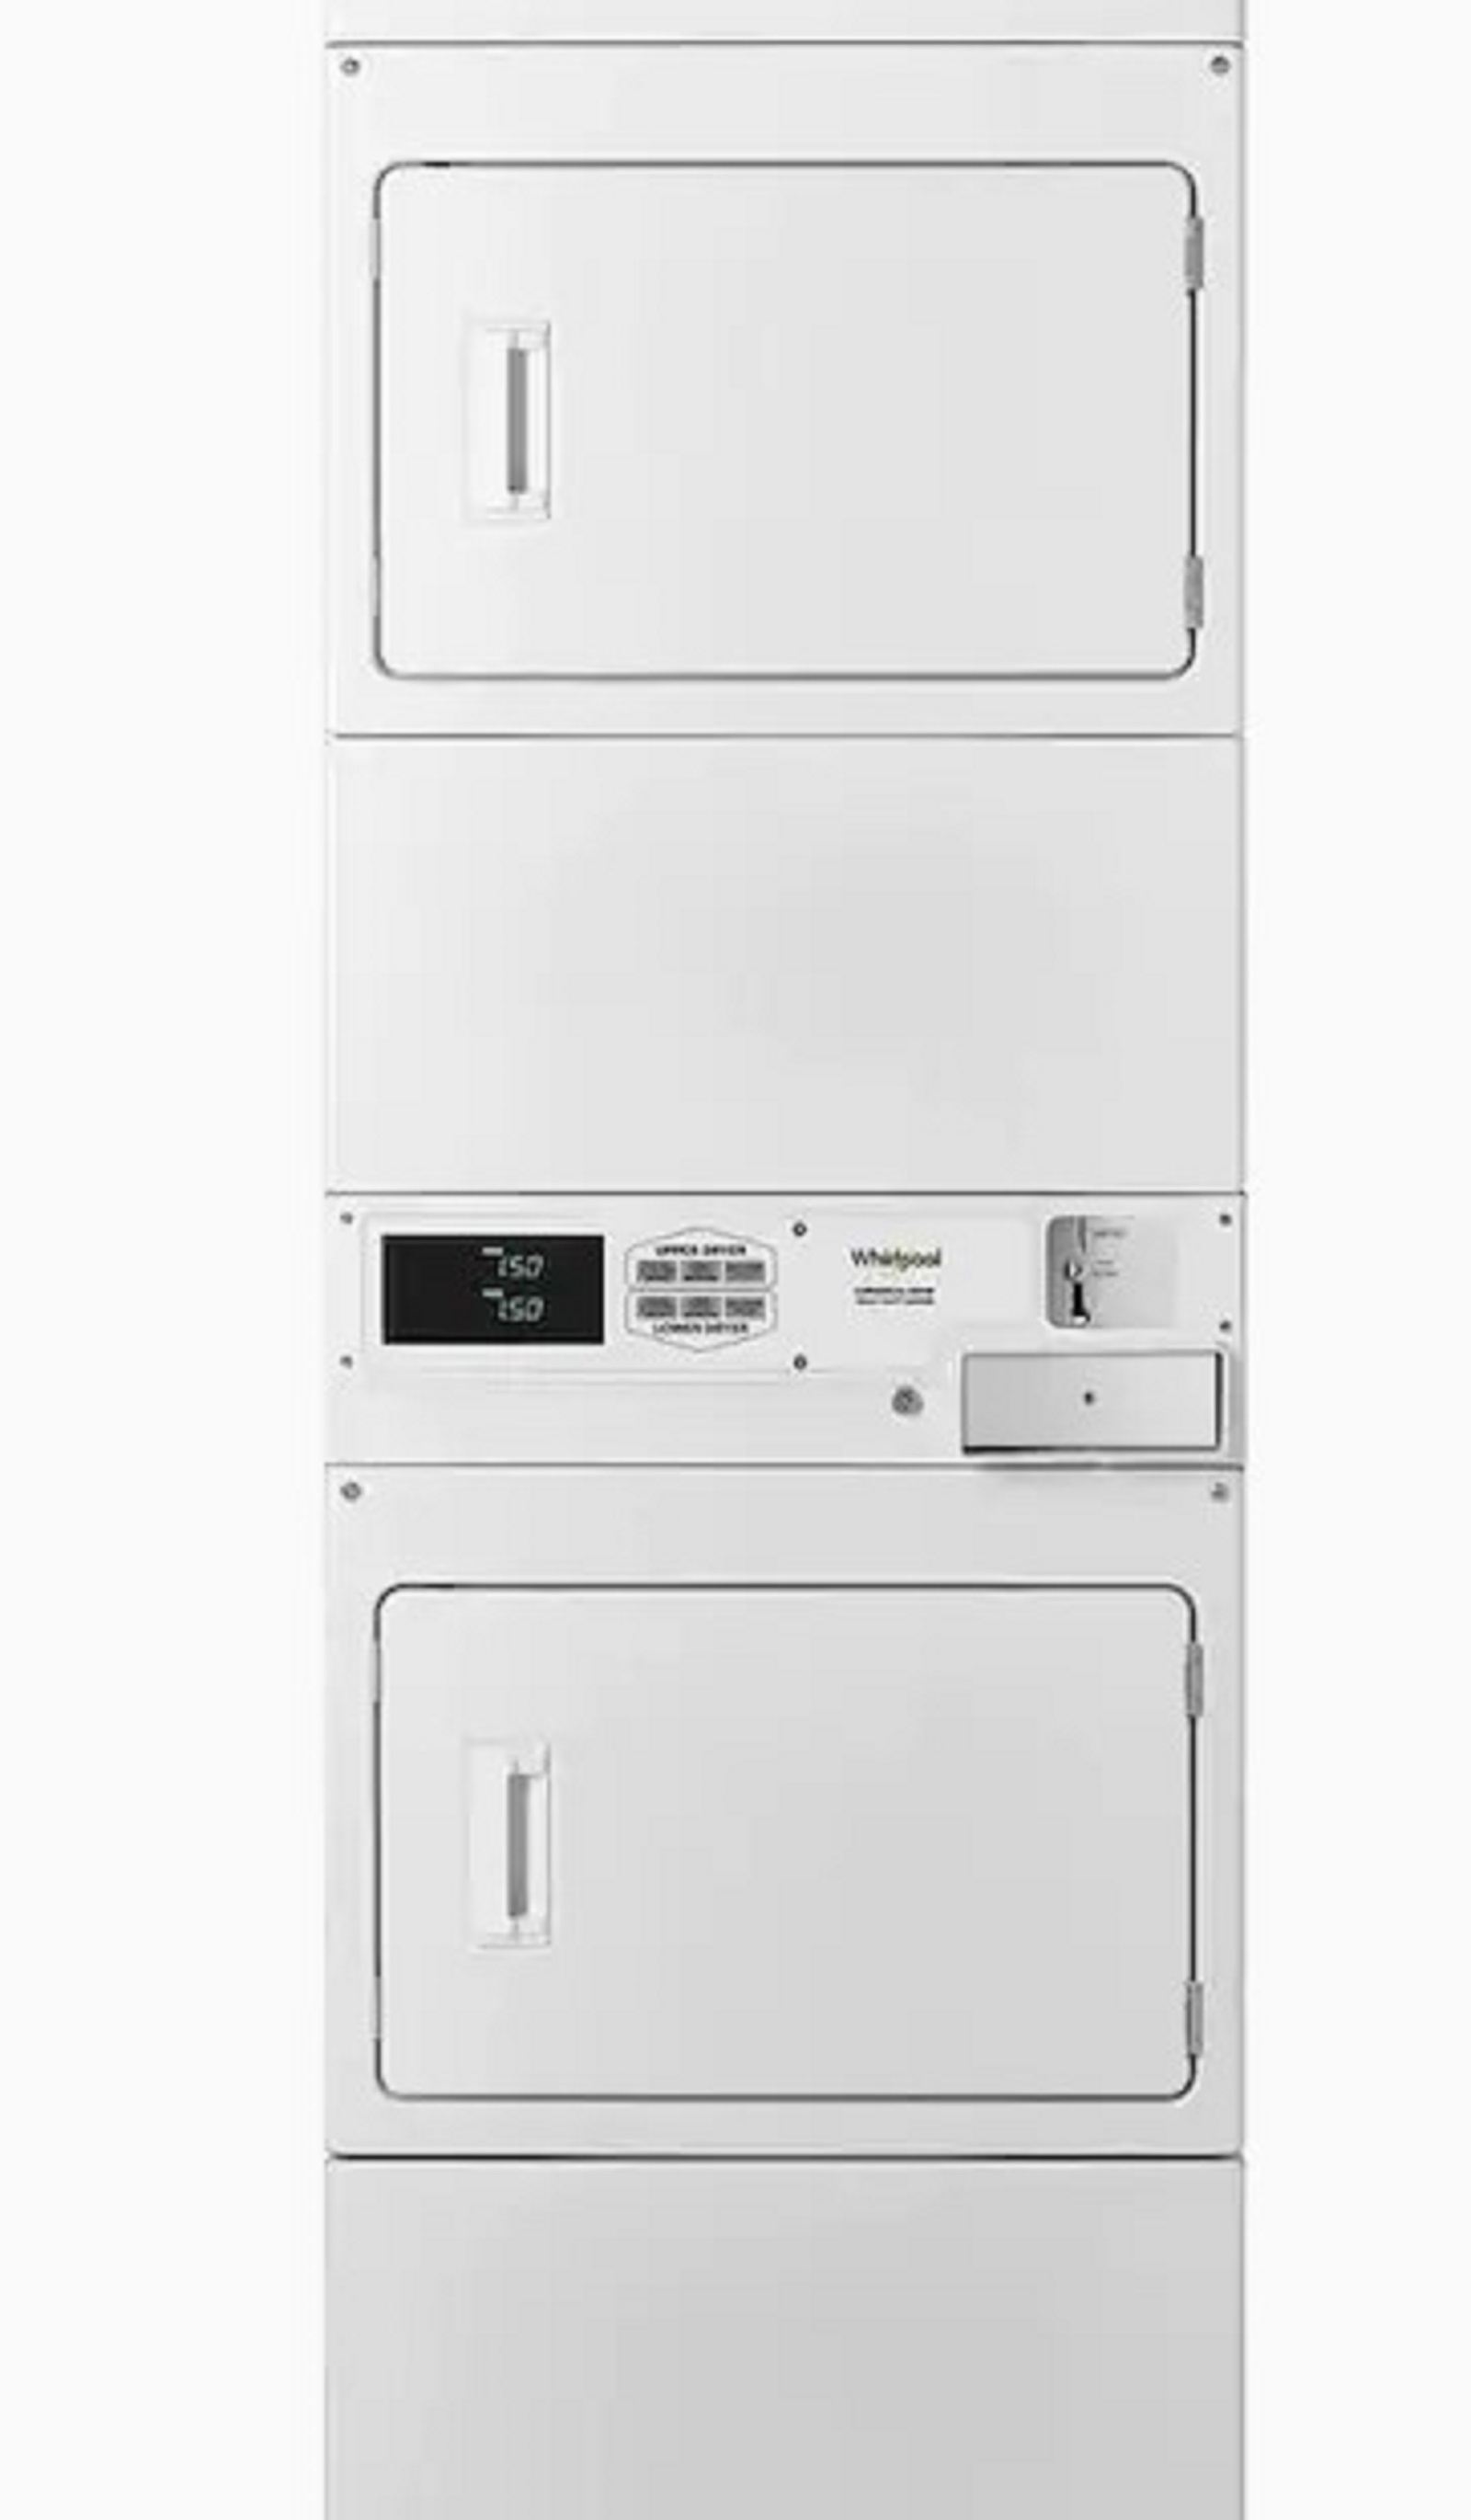 Whirlpool CSP2940HQ 27" 7.4 cu.ft. White Washer and Dryer Combination